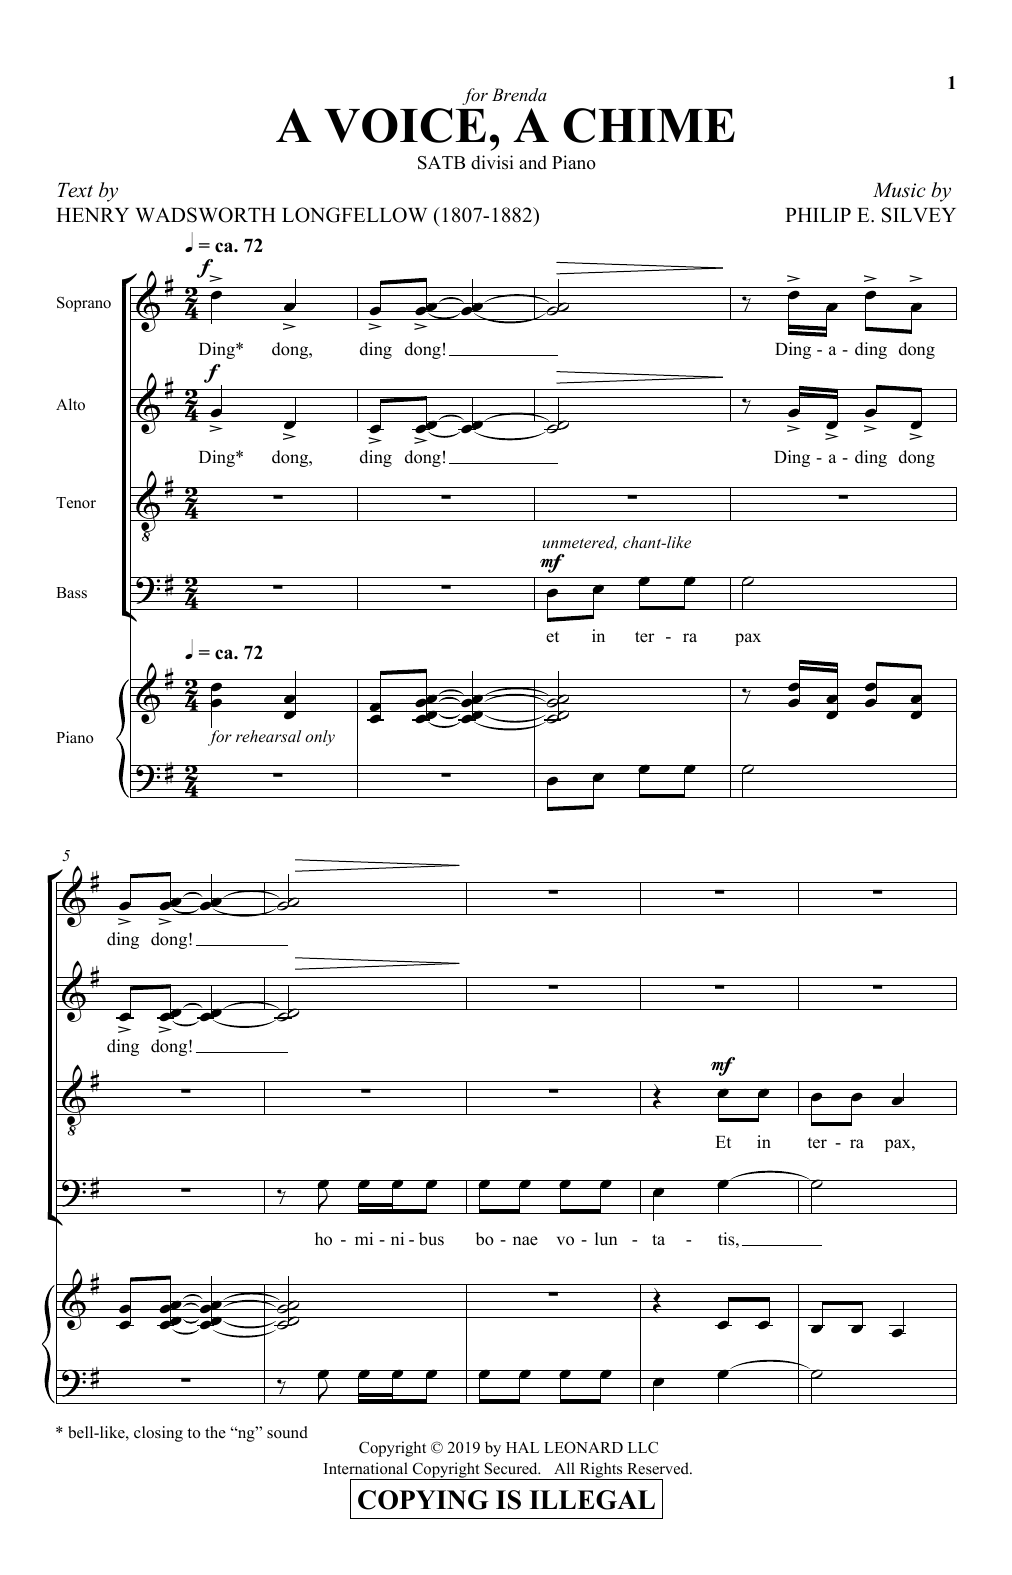 Download Henry Wadsworth Longfellow and Phili A Voice, A Chime Sheet Music